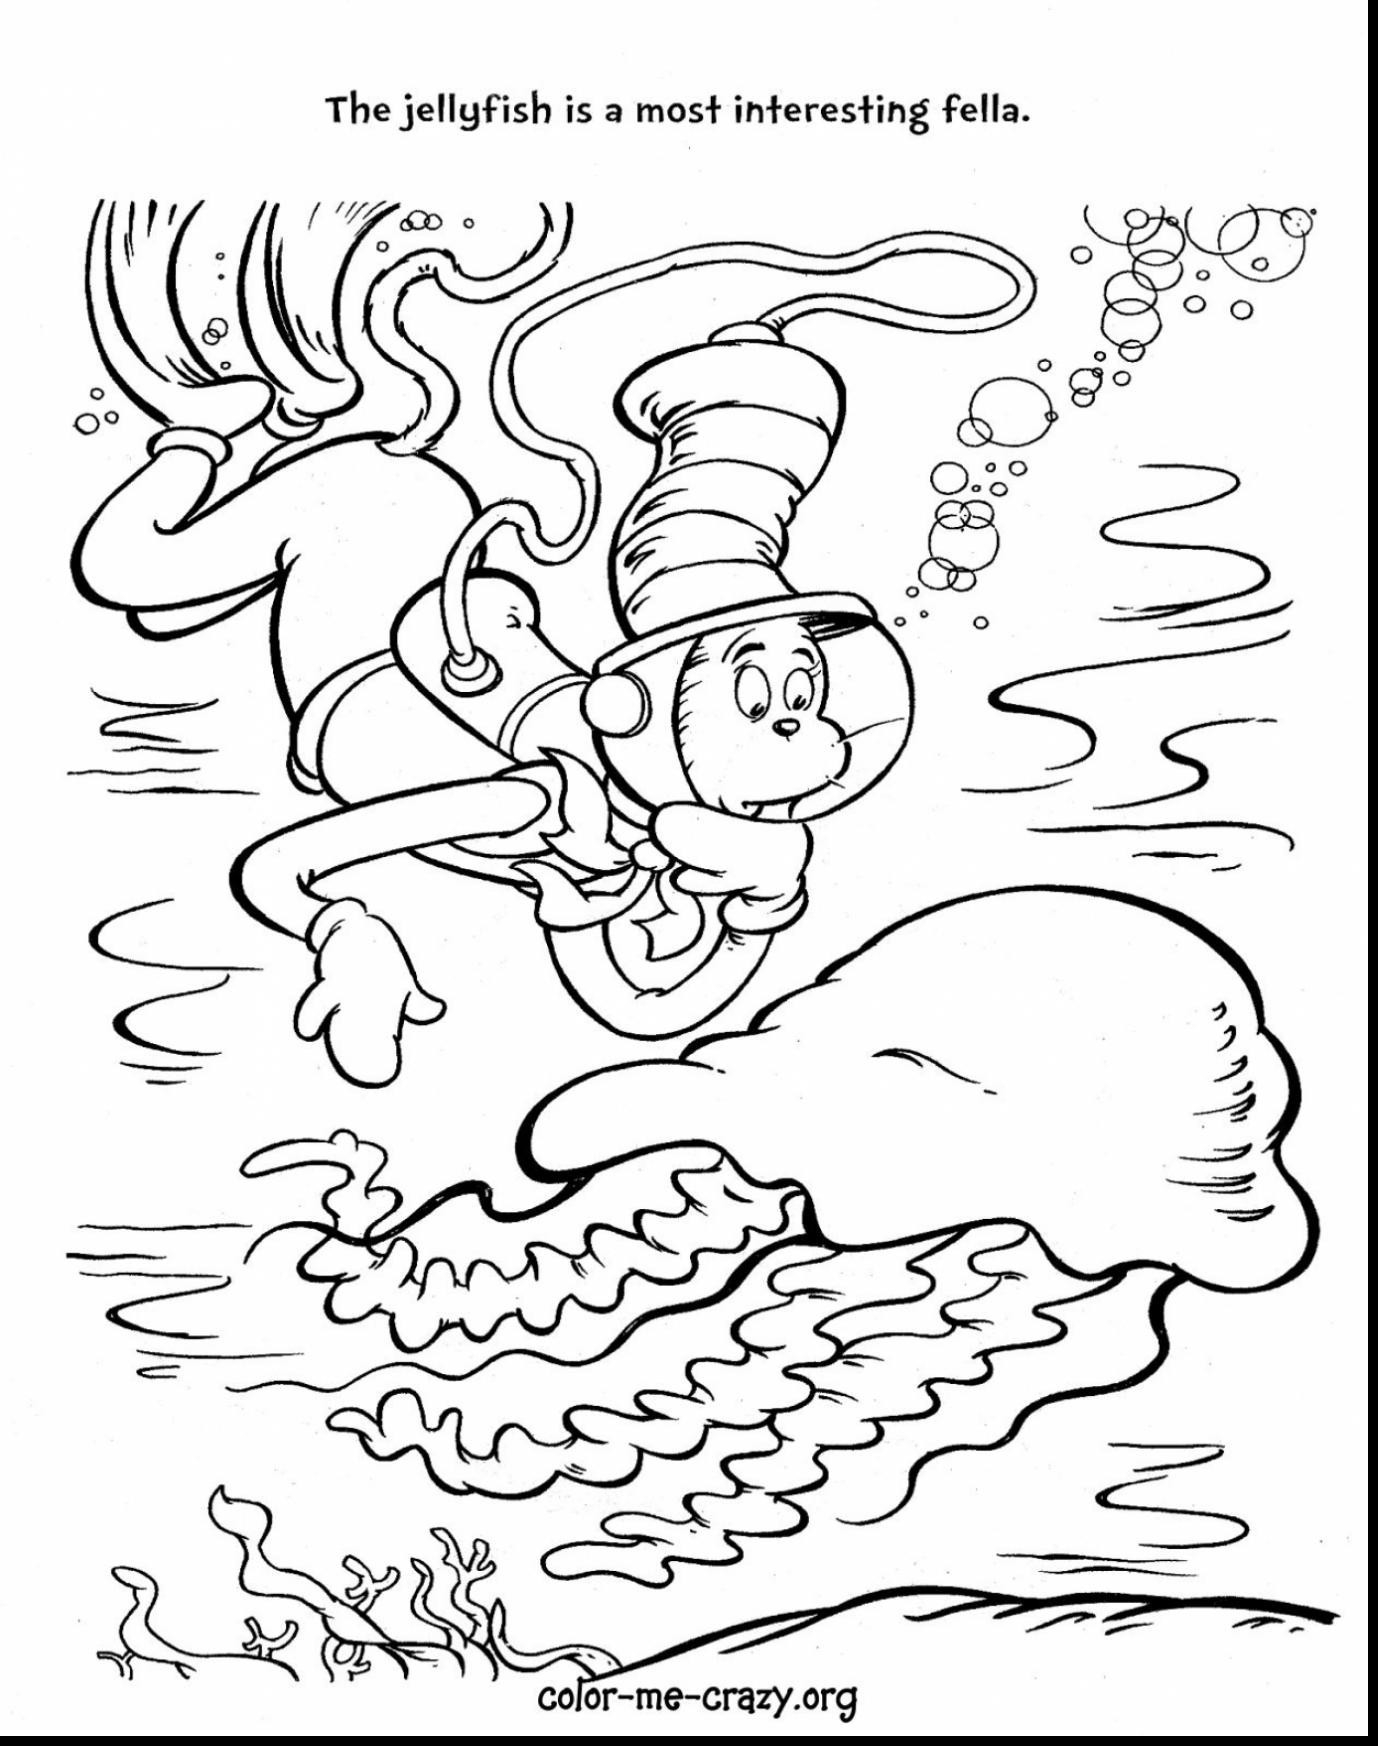 Cat In The Hat Coloring Page Dr Seuss Cat In The Hat Coloring Pages At Getdrawings Free For